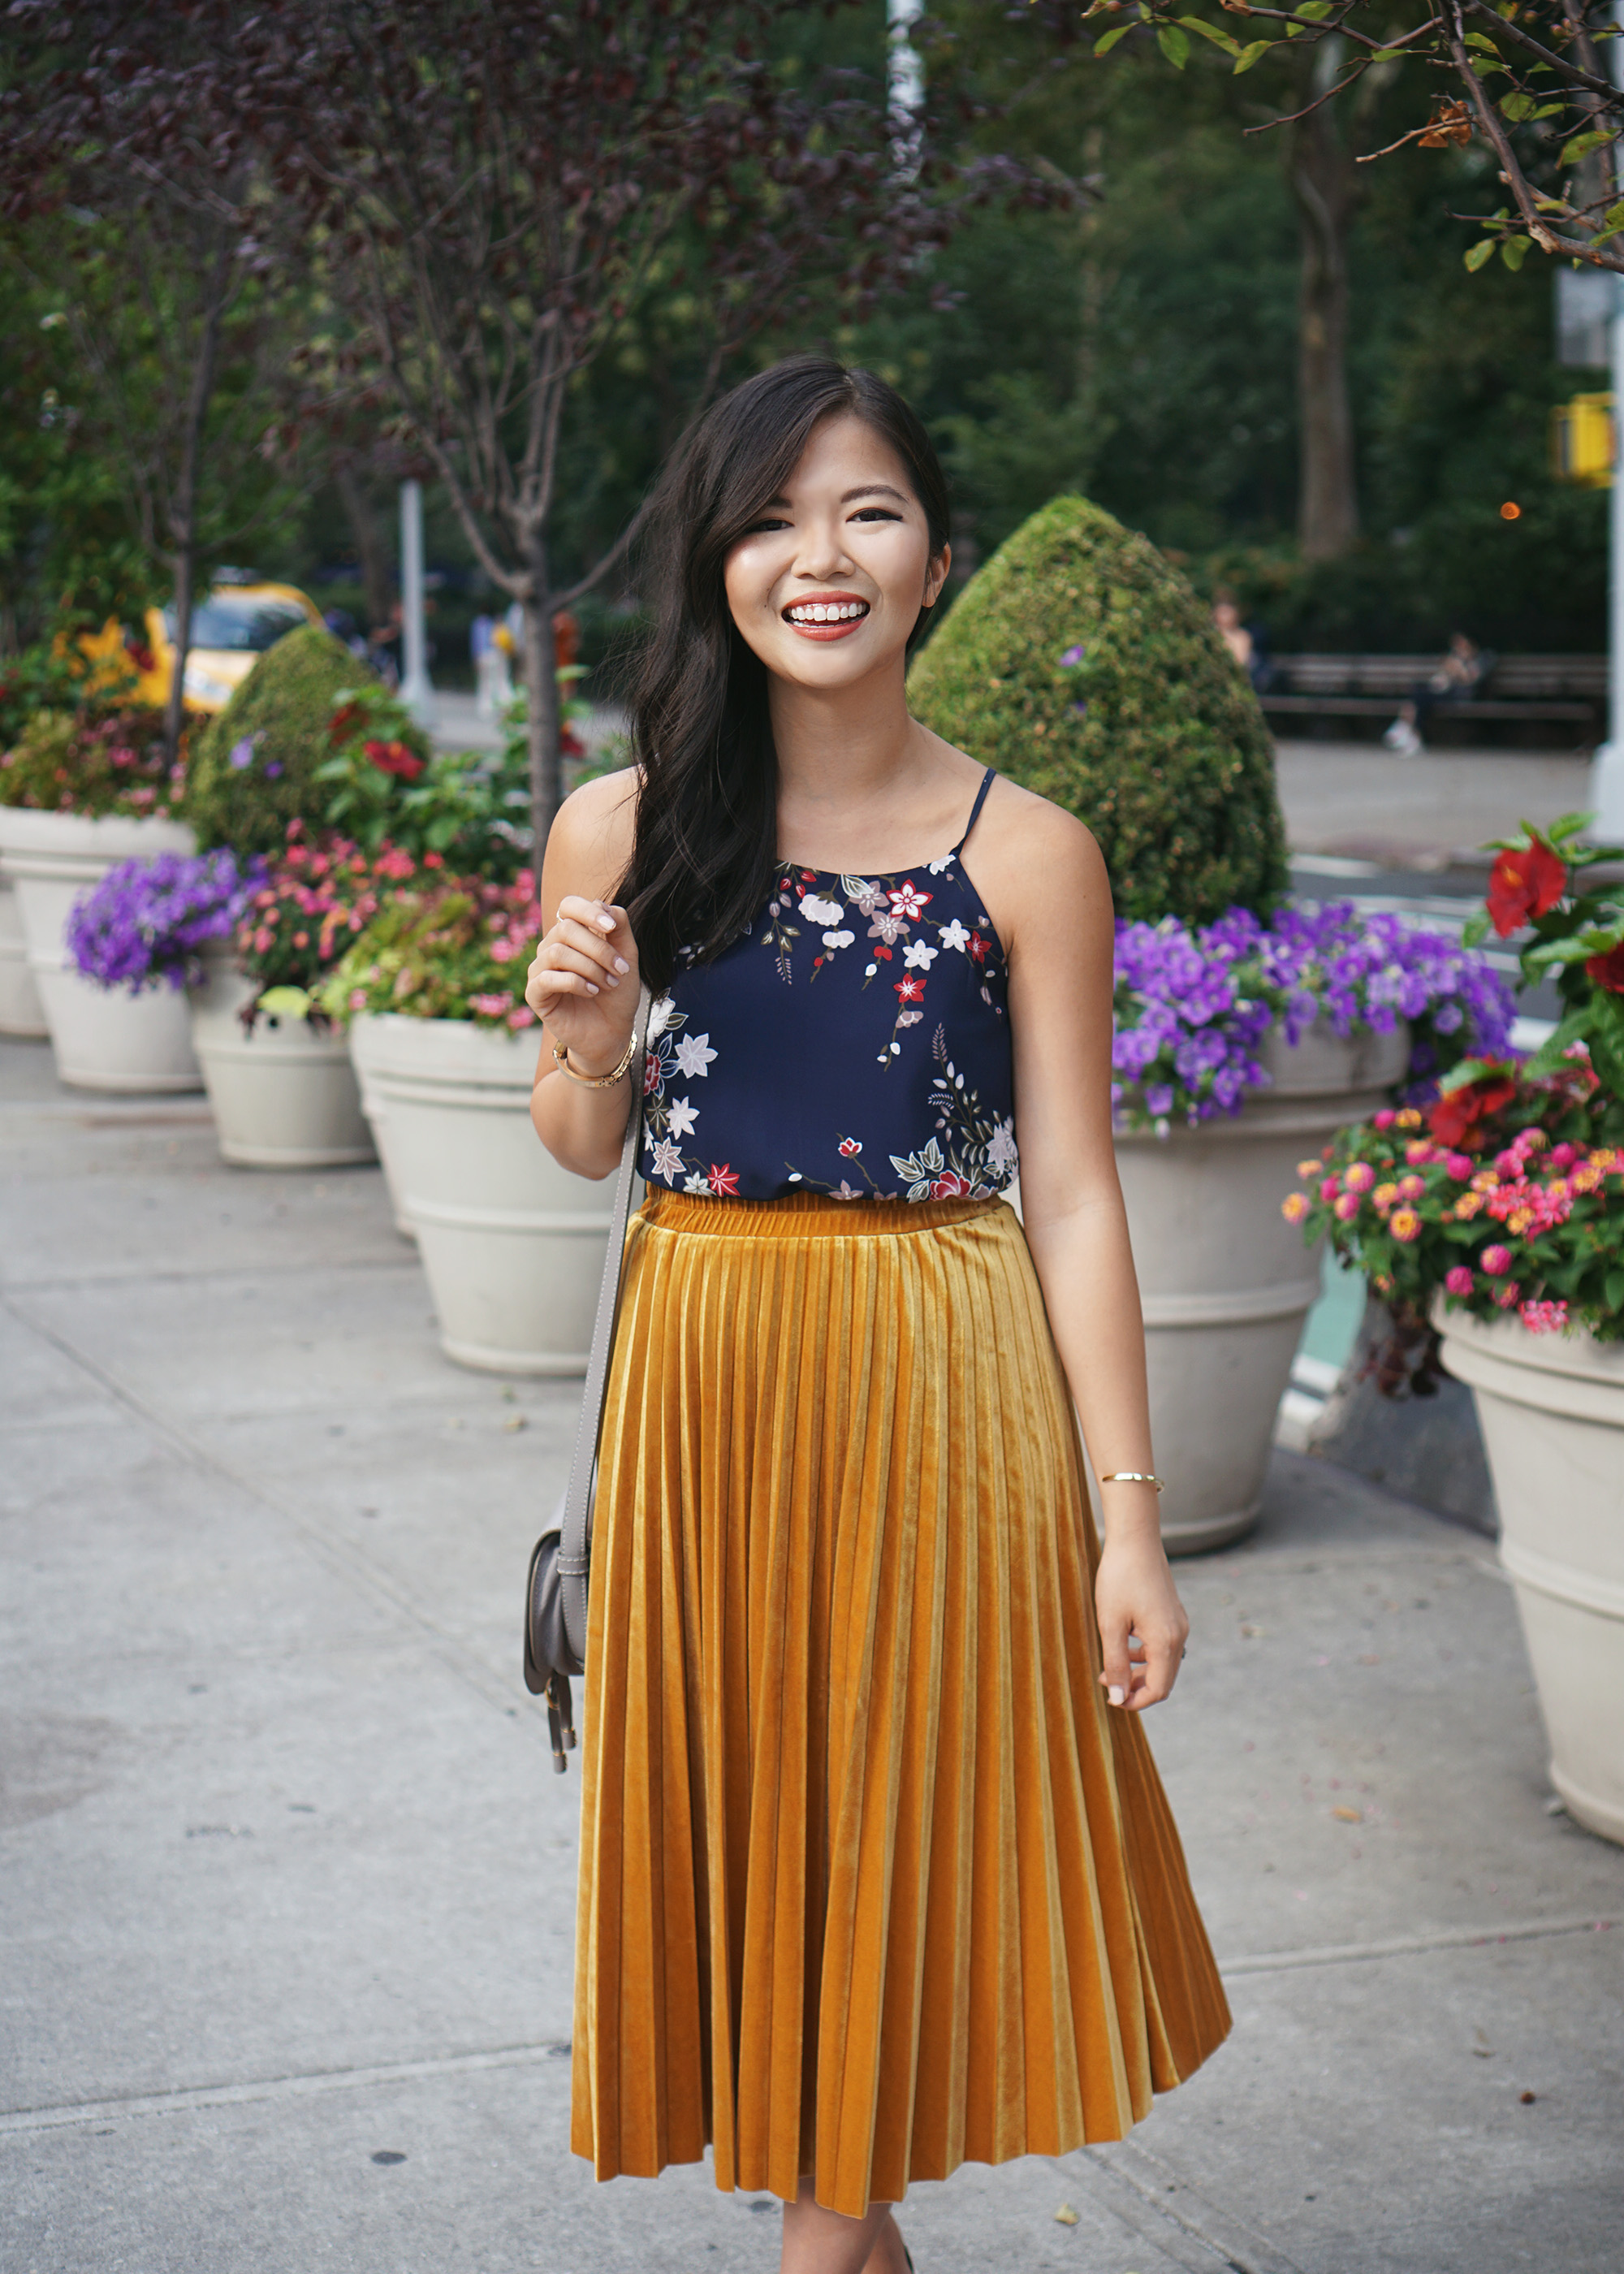 Petite Style: How to Wear a Skirt Over a Dress